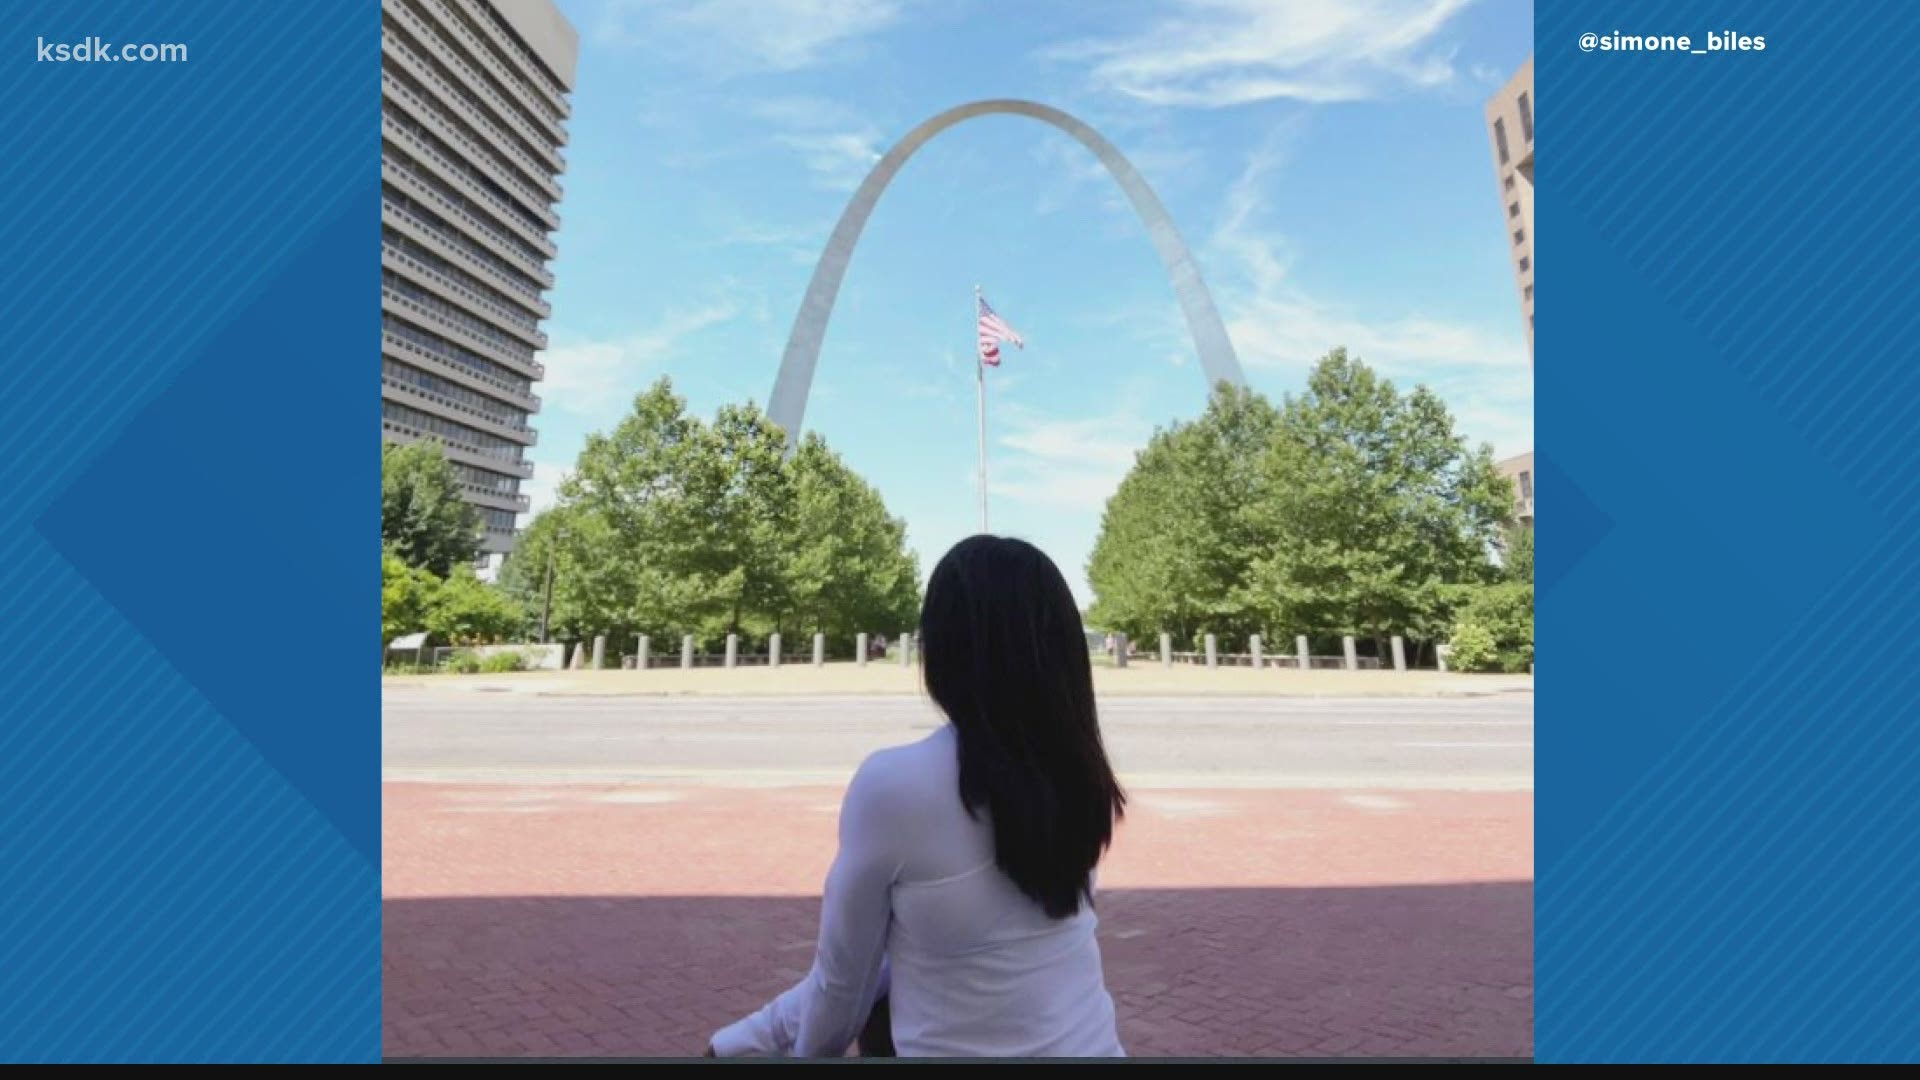 She tweeted a photo of herself at the Arch ahead of this weekend's Gymnastics trials.